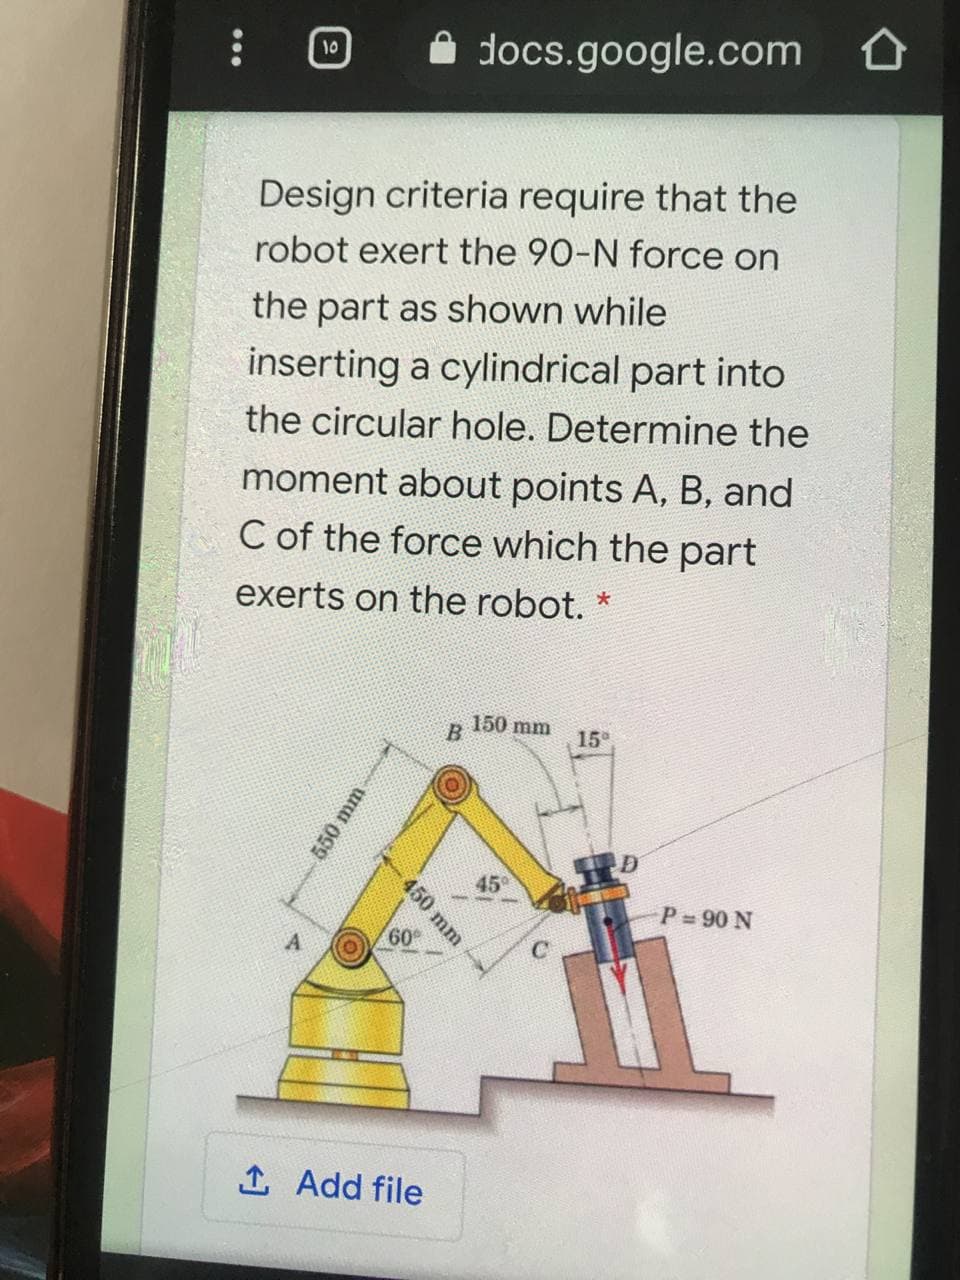 A docs.google.com
10
Design criteria require that the
robot exert the 90-N force on
the part as shown while
inserting a cylindrical part into
the circular hole. Determine the
moment about points A, B, and
C of the force which the part
exerts on the robot. *
150 mm
15°
45
P 90 N
60
1 Add file
550 mm
450 mm
